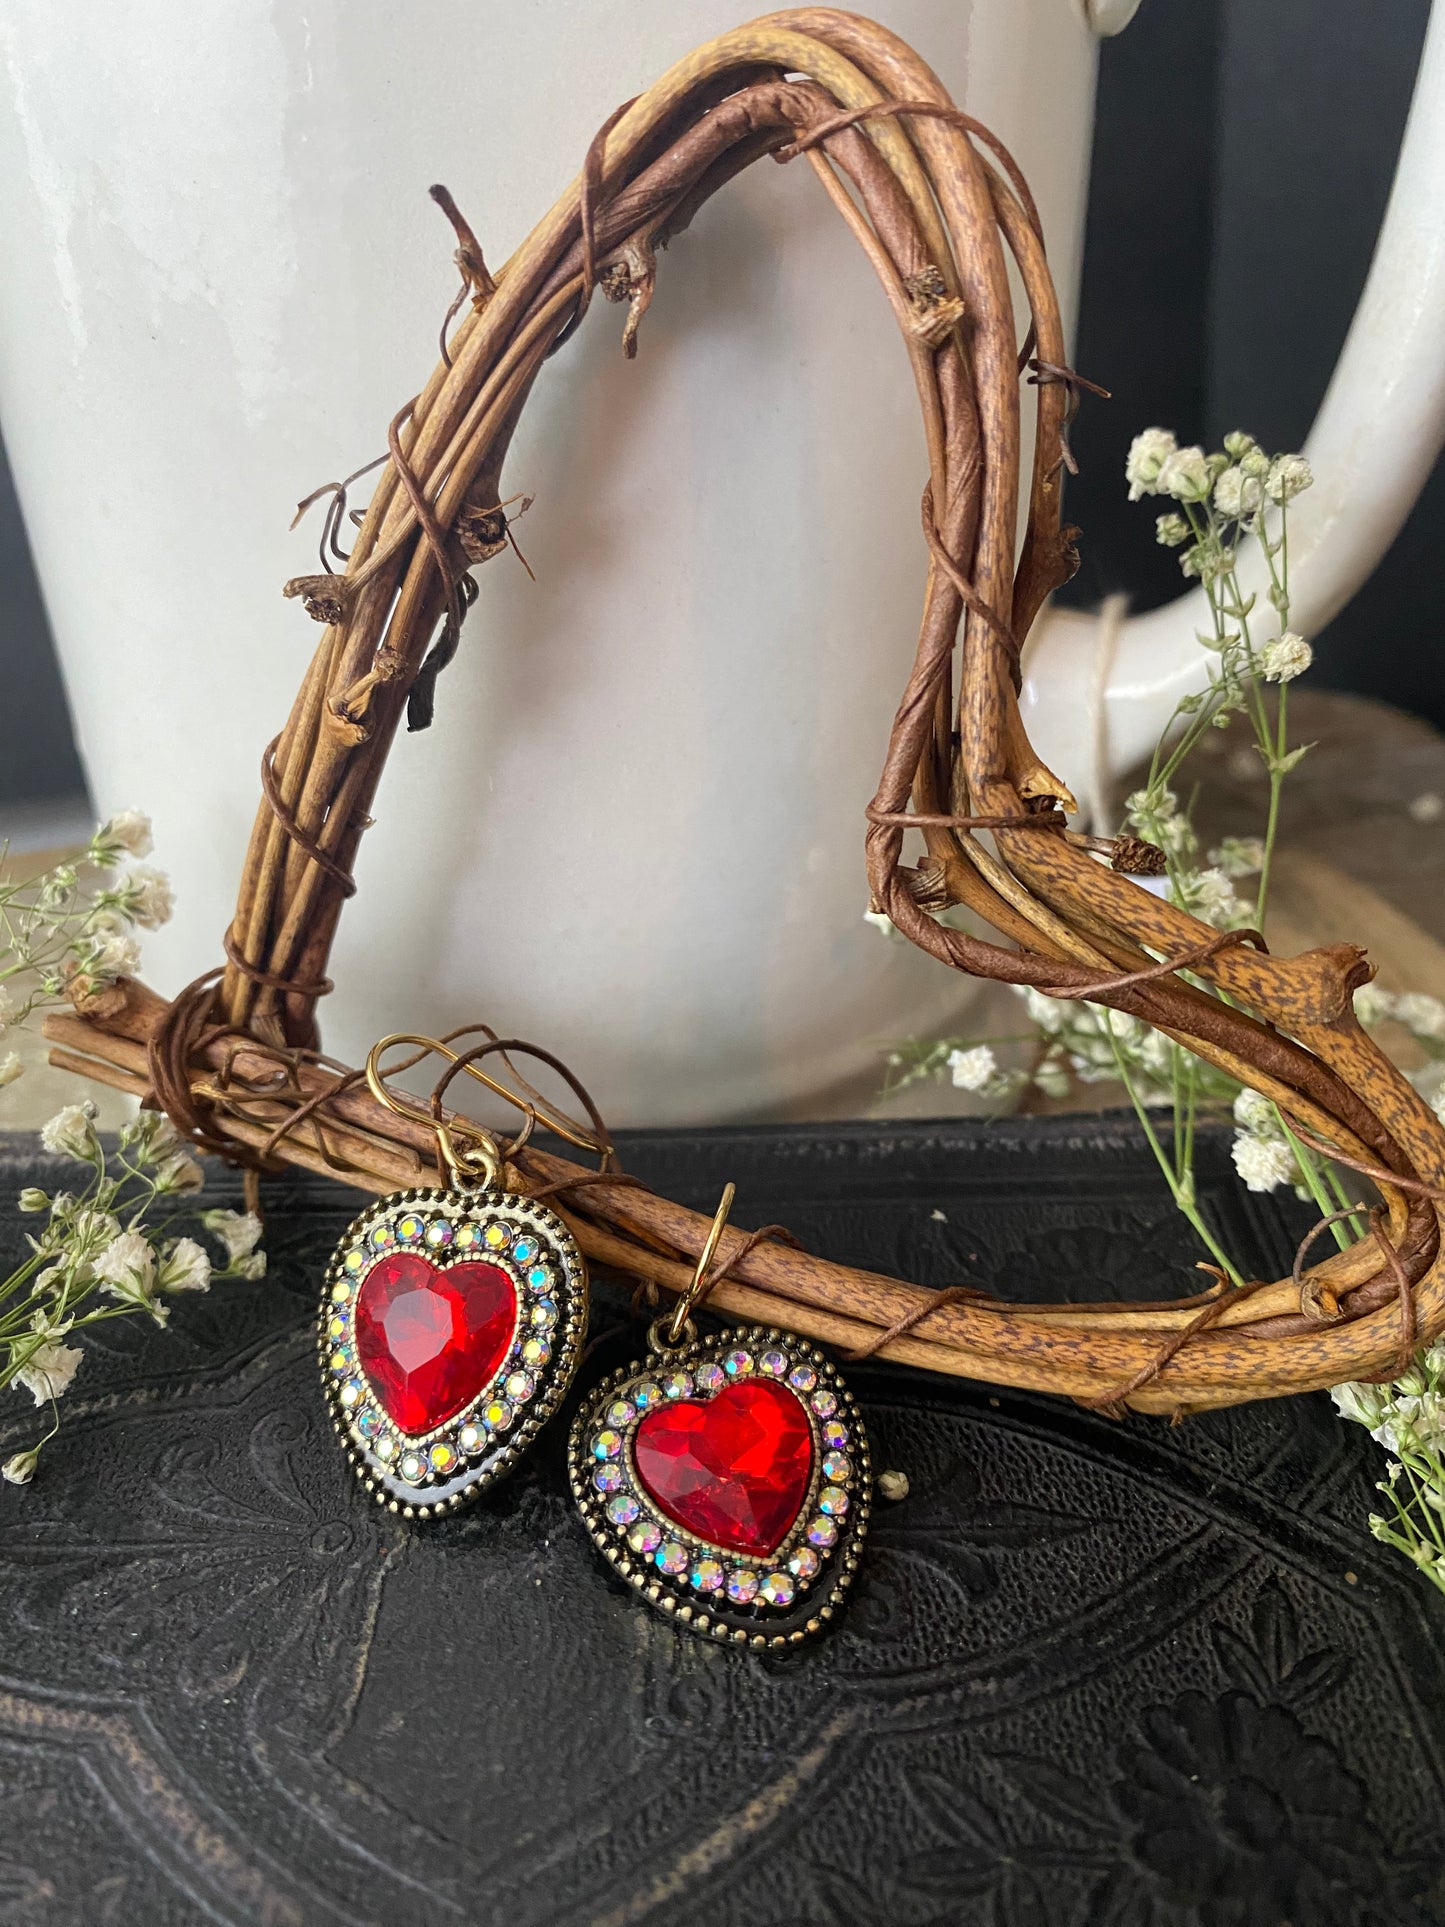 Red heart crystals, valentine’s Day, bronze metal, earrings - Andria Bieber Designs 